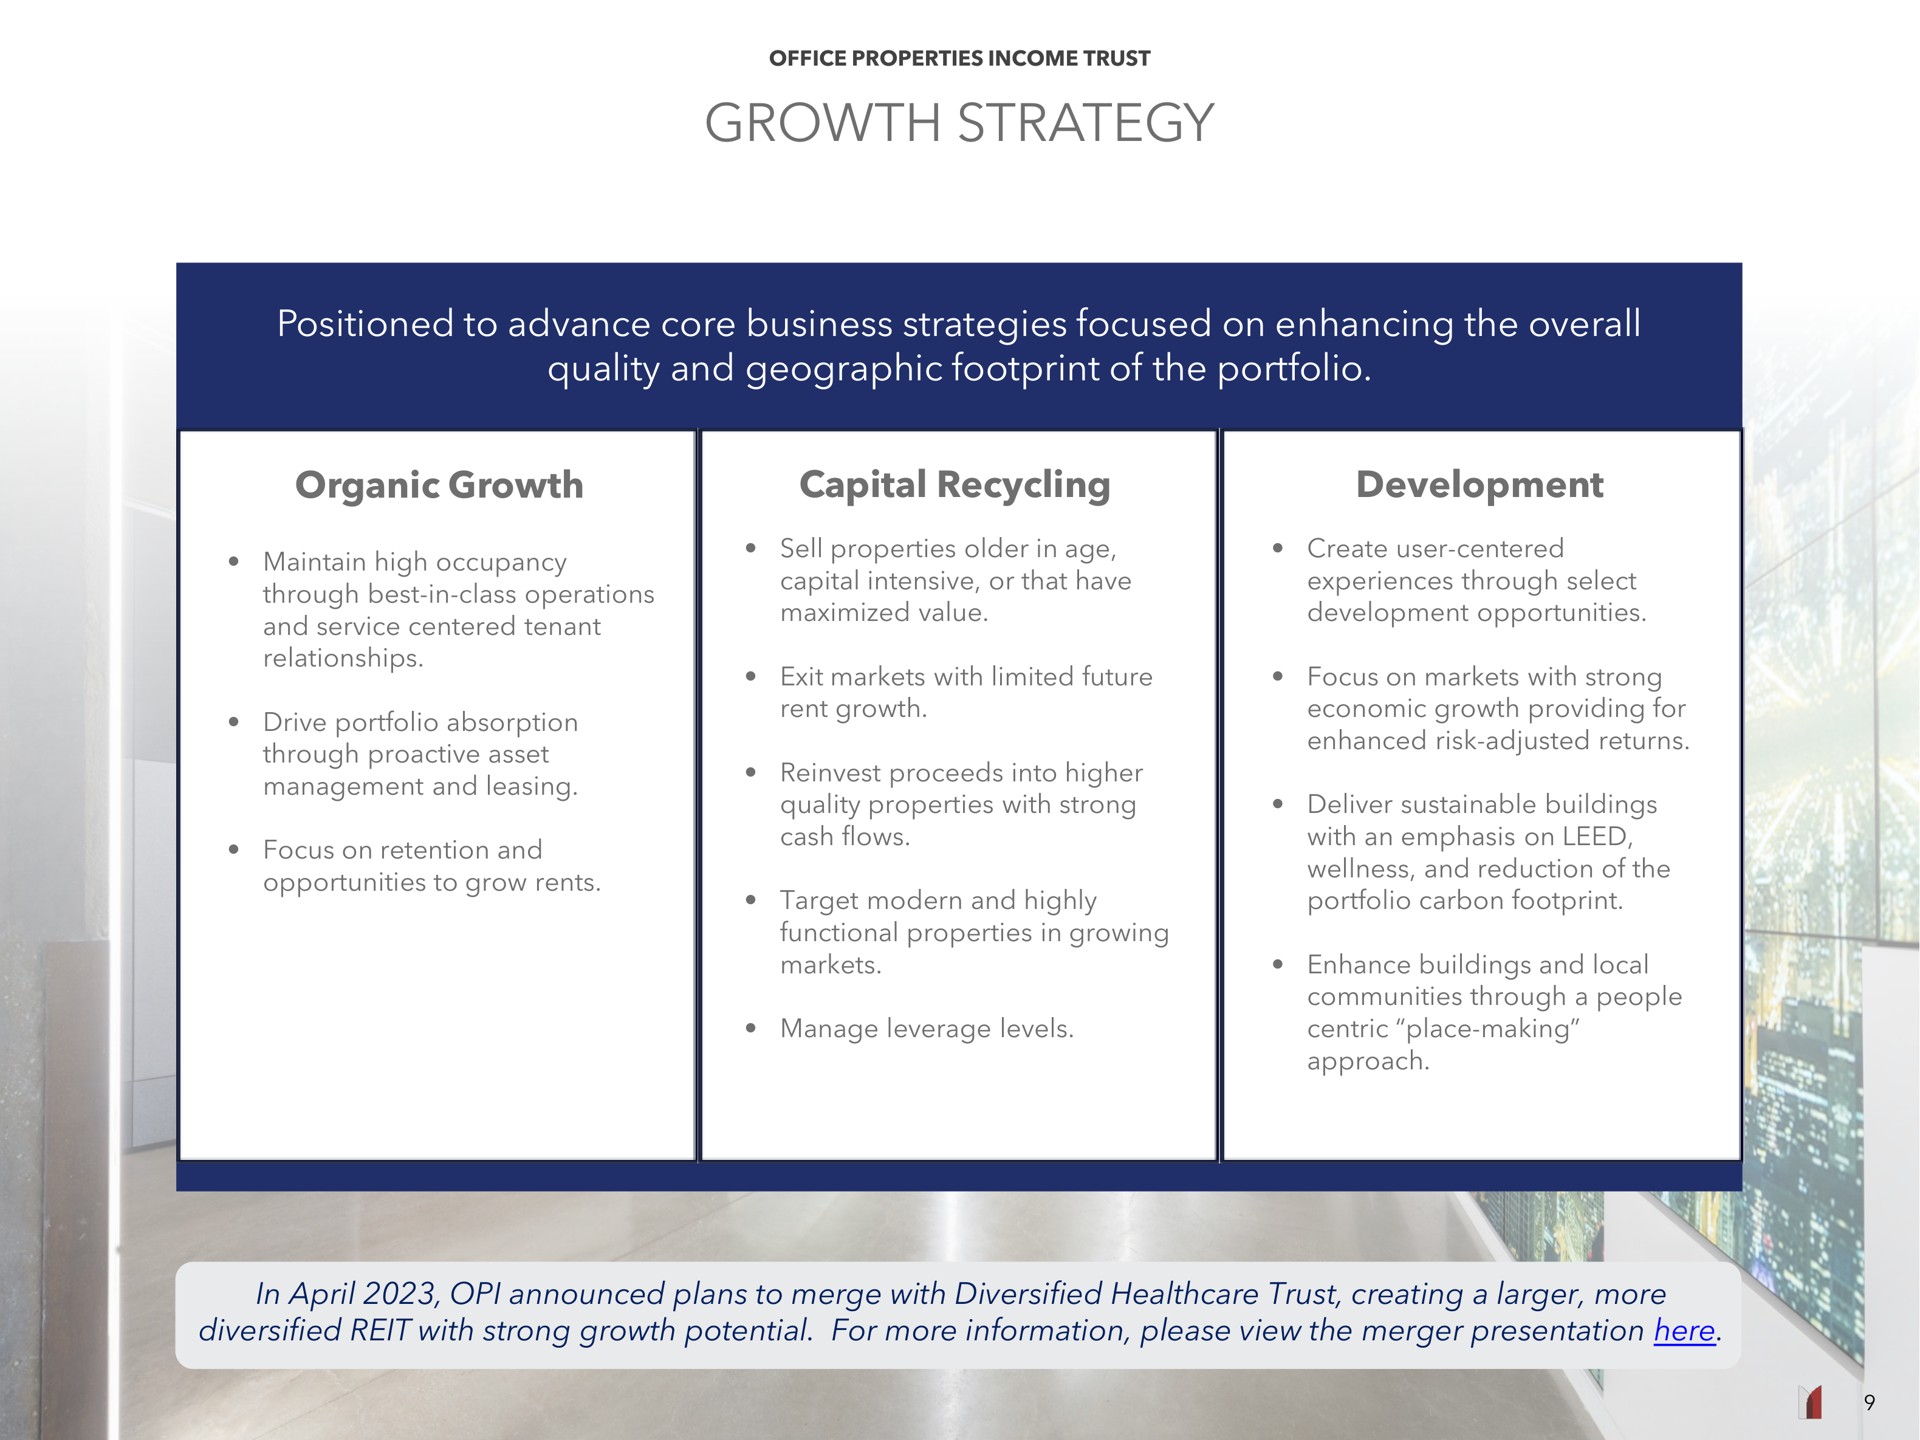 growth strategy positioned to advance core business strategies focused on enhancing the overall quality and geographic footprint of the portfolio organic growth capital recycling development | Office Properties Income Trust